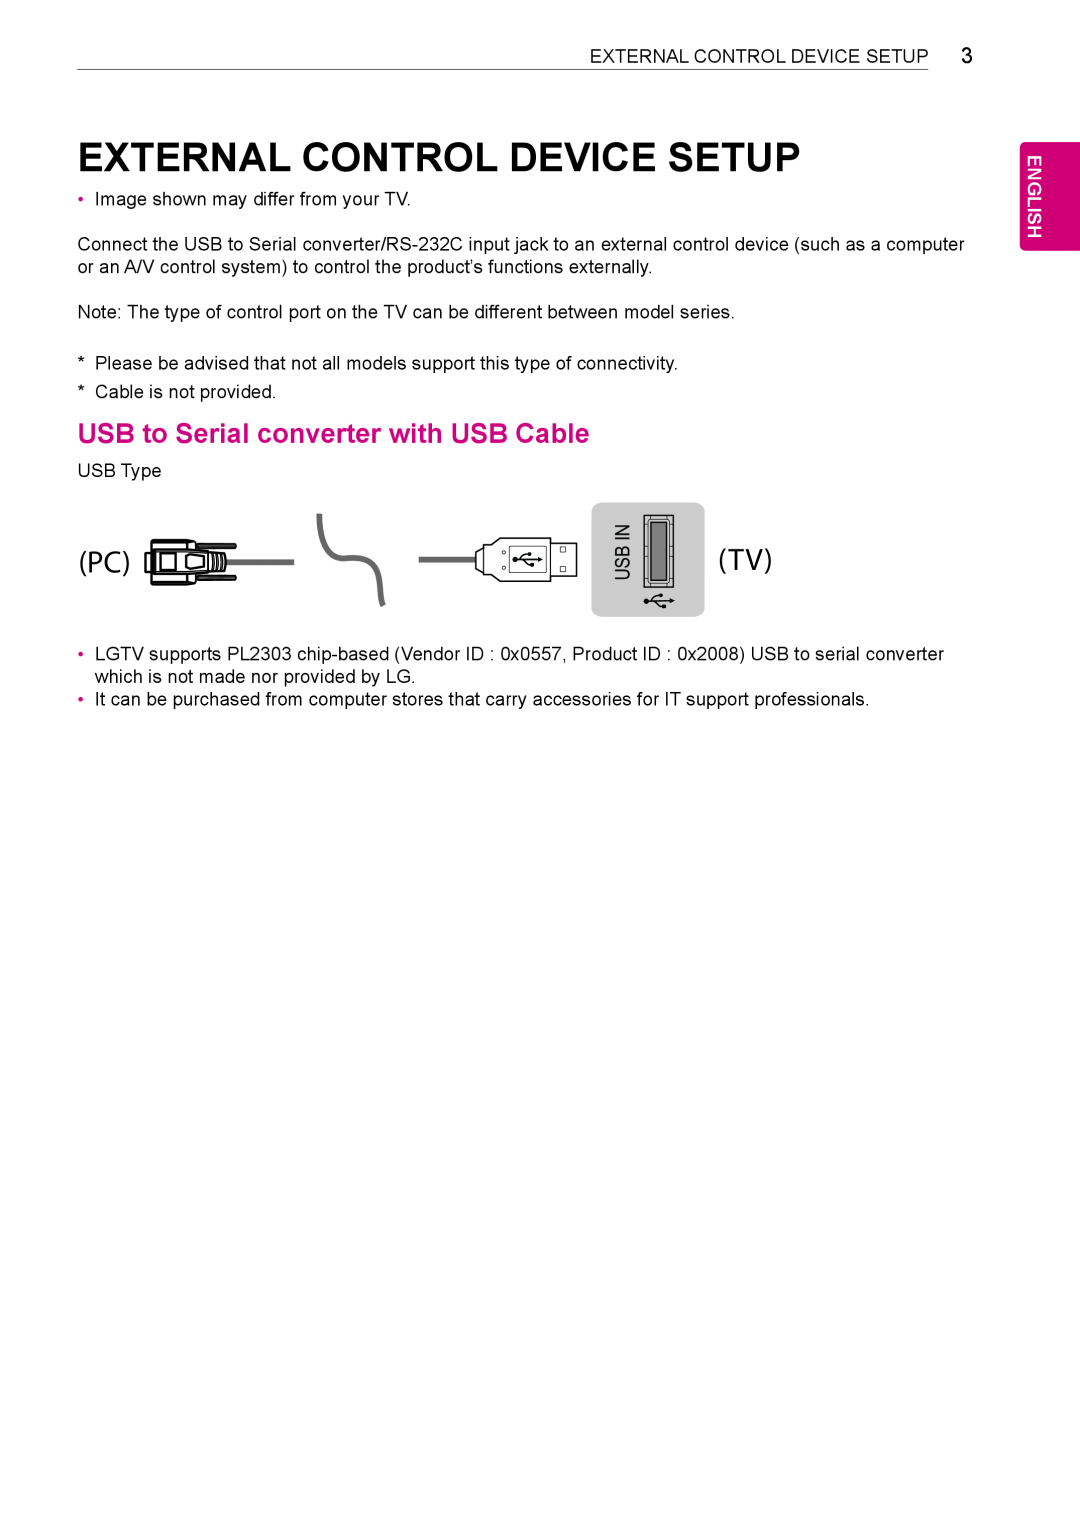 LG Electronics 55LA9650 owner manual External Control Device Setup, USB to Serial converter with USB Cable, English 